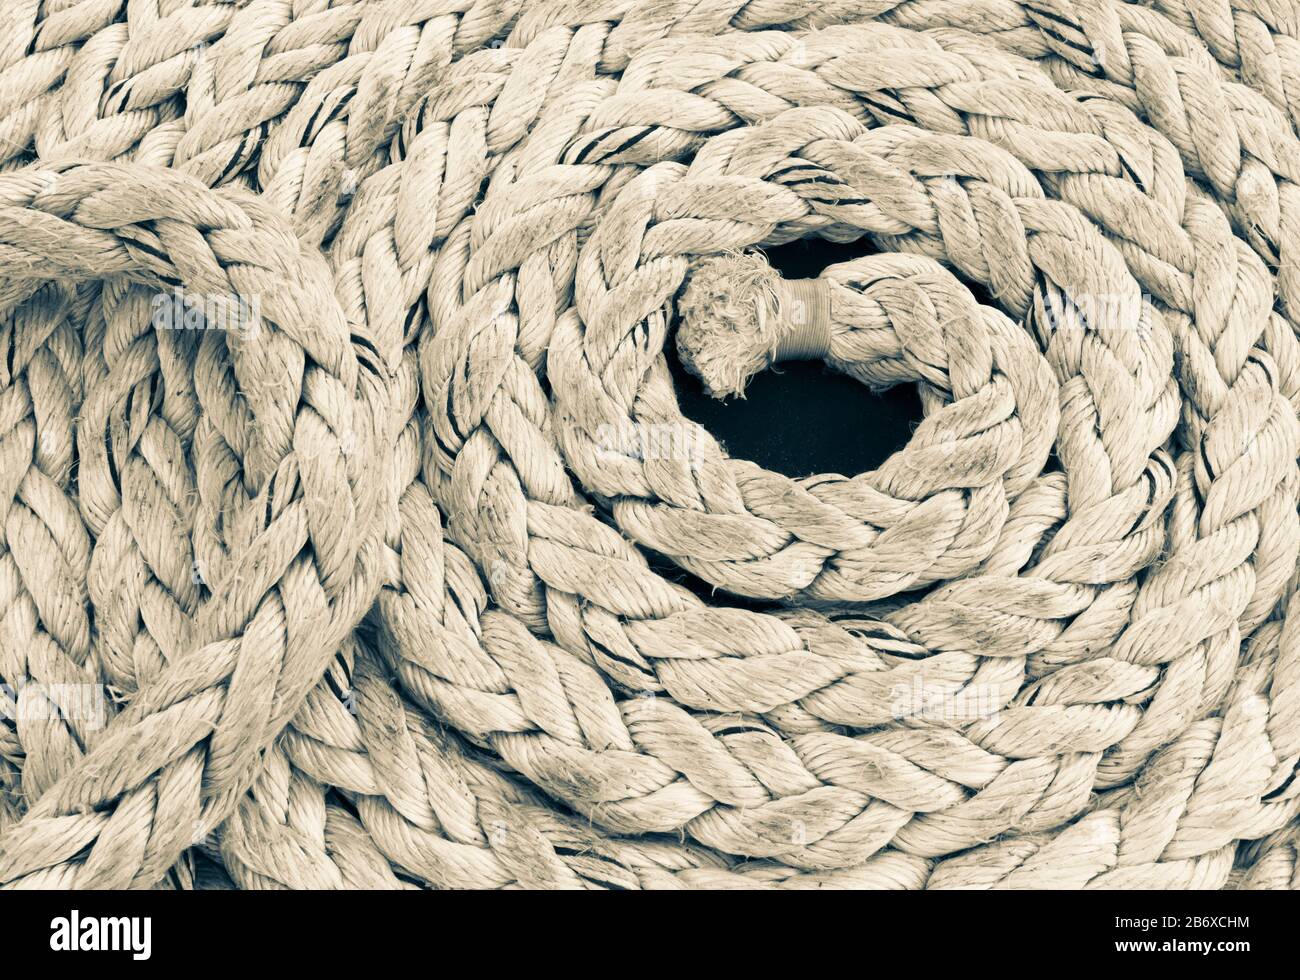 Coil of plaited rope on sailing boat deck Stock Photo